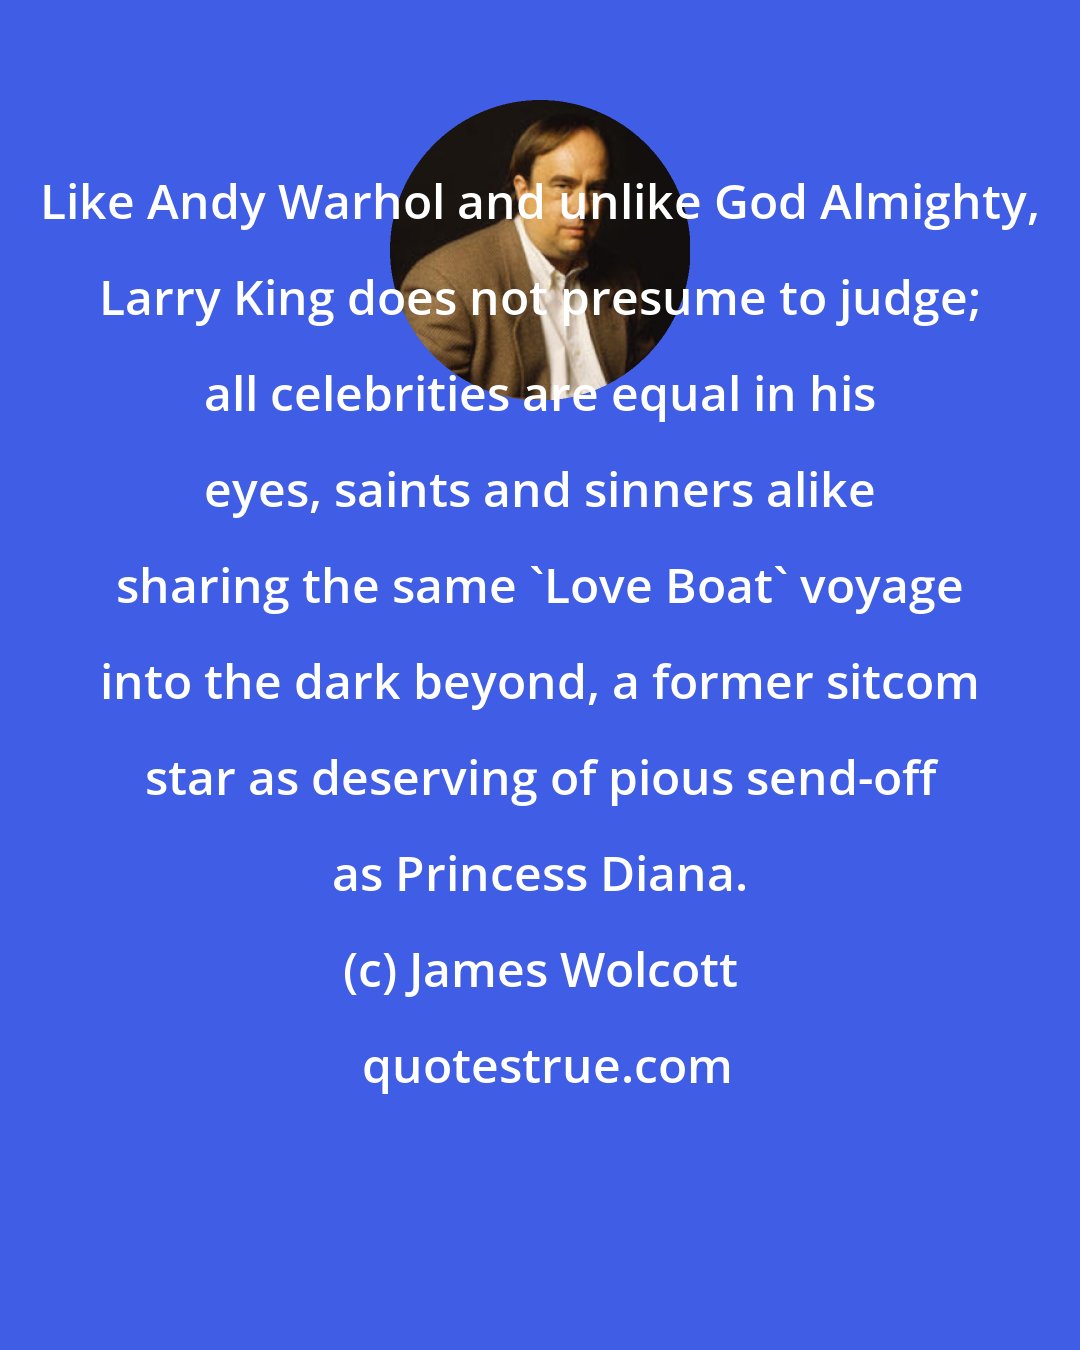 James Wolcott: Like Andy Warhol and unlike God Almighty, Larry King does not presume to judge; all celebrities are equal in his eyes, saints and sinners alike sharing the same 'Love Boat' voyage into the dark beyond, a former sitcom star as deserving of pious send-off as Princess Diana.